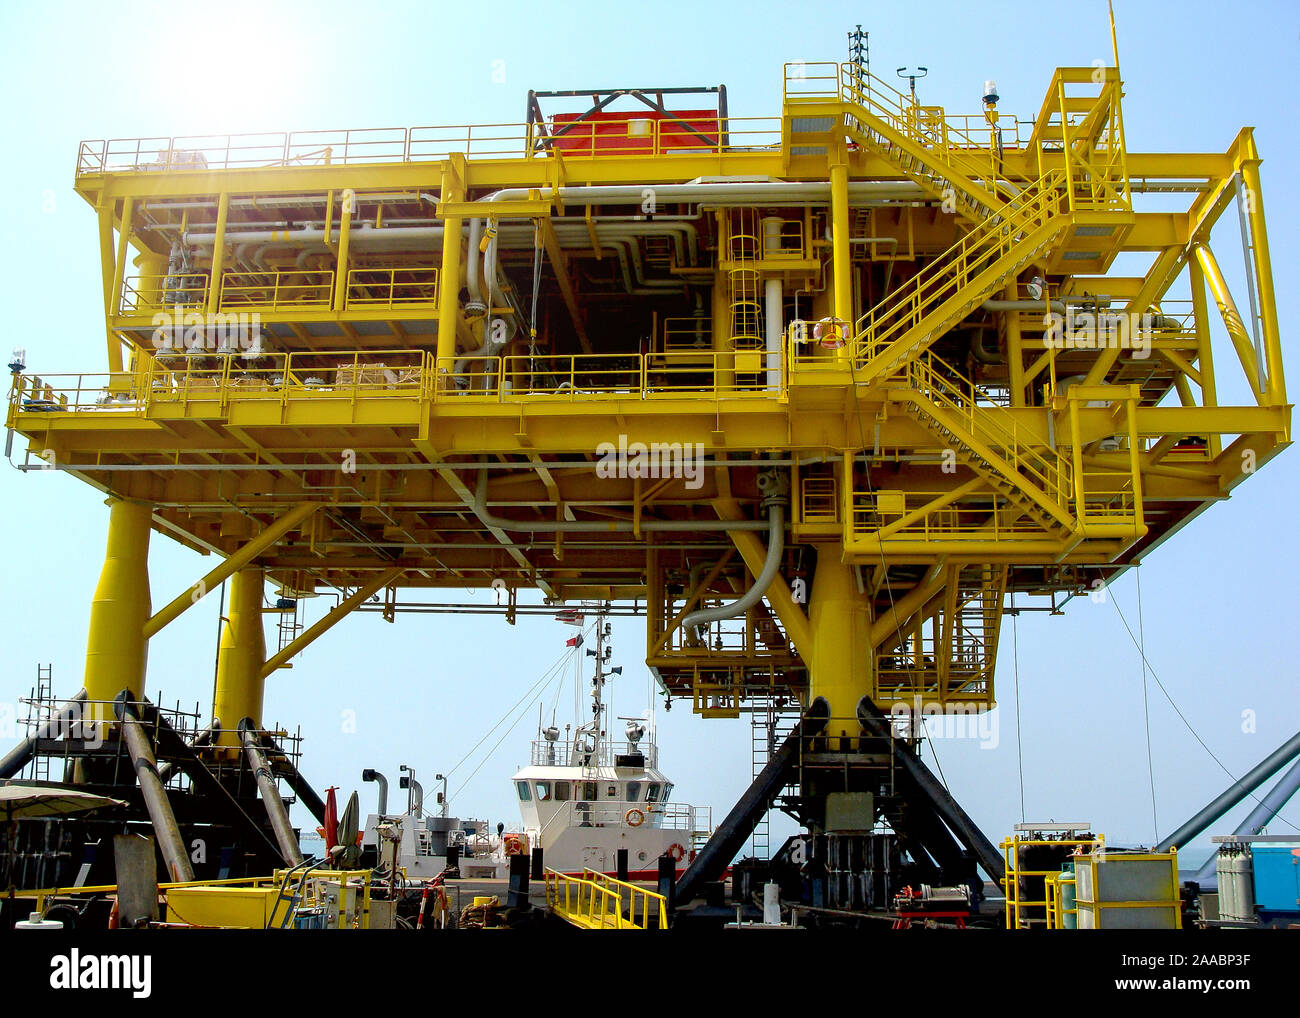 Offshore oil rig platform during construction site in the harbor yard. Stock Photo